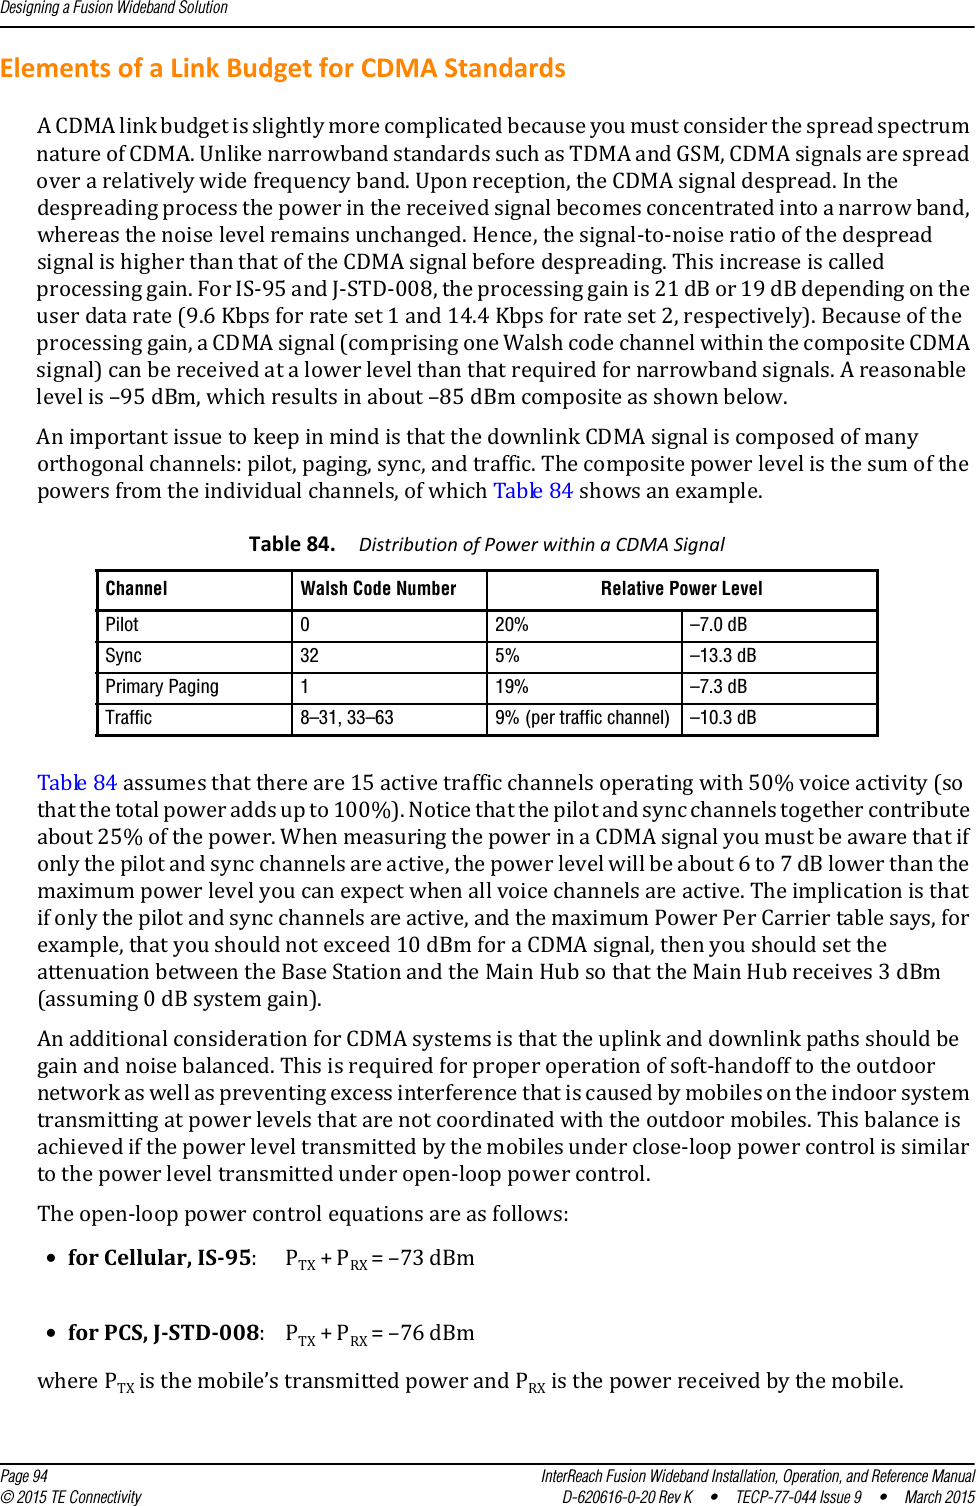 Designing a Fusion Wideband Solution  Page 94 InterReach Fusion Wideband Installation, Operation, and Reference Manual© 2015 TE Connectivity D-620616-0-20 Rev K  •  TECP-77-044 Issue 9  •  March 2015Elements of a Link Budget for CDMA StandardsA CDMA link budget is slightly more complicated because you must consider the spread spectrum nature of CDMA. Unlike narrowband standards such as TDMA and GSM, CDMA signals are spread over a relatively wide frequency band. Upon reception, the CDMA signal despread. In the despreading process the power in the received signal becomes concentrated into a narrow band, whereas the noise level remains unchanged. Hence, the signal-to-noise ratio of the despread signal is higher than that of the CDMA signal before despreading. This increase is called processing gain. For IS-95 and J-STD-008, the processing gain is 21 dB or 19 dB depending on the user data rate (9.6 Kbps for rate set 1 and 14.4 Kbps for rate set 2, respectively). Because of the processing gain, a CDMA signal (comprising one Walsh code channel within the composite CDMA signal) can be received at a lower level than that required for narrowband signals. A reasonable level is –95 dBm, which results in about –85 dBm composite as shown below.An important issue to keep in mind is that the downlink CDMA signal is composed of many orthogonal channels: pilot, paging, sync, and traffic. The composite power level is the sum of the powers from the individual channels, of which Table 84 shows an example.Table 84 assumes that there are 15 active traffic channels operating with 50% voice activity (so that the total power adds up to 100%). Notice that the pilot and sync channels together contribute about 25% of the power. When measuring the power in a CDMA signal you must be aware that if only the pilot and sync channels are active, the power level will be about 6 to 7 dB lower than the maximum power level you can expect when all voice channels are active. The implication is that if only the pilot and sync channels are active, and the maximum Power Per Carrier table says, for example, that you should not exceed 10 dBm for a CDMA signal, then you should set the attenuation between the Base Station and the Main Hub so that the Main Hub receives 3 dBm (assuming 0 dB system gain).An additional consideration for CDMA systems is that the uplink and downlink paths should be gain and noise balanced. This is required for proper operation of soft-handoff to the outdoor network as well as preventing excess interference that is caused by mobiles on the indoor system transmitting at power levels that are not coordinated with the outdoor mobiles. This balance is achieved if the power level transmitted by the mobiles under close-loop power control is similar to the power level transmitted under open-loop power control. The open-loop power control equations are as follows:where PTX is the mobile’s transmitted power and PRX is the power received by the mobile.Table 84. Distribution of Power within a CDMA SignalChannel Walsh Code Number Relative Power LevelPilot 0 20% –7.0 dBSync 32 5% –13.3 dBPrimary Paging 1 19% –7.3 dBTraffic 8–31, 33–63 9% (per traffic channel) –10.3 dB•for Cellular, IS-95: PTX + PRX = –73 dBm•for PCS, J-STD-008: PTX + PRX = –76 dBm